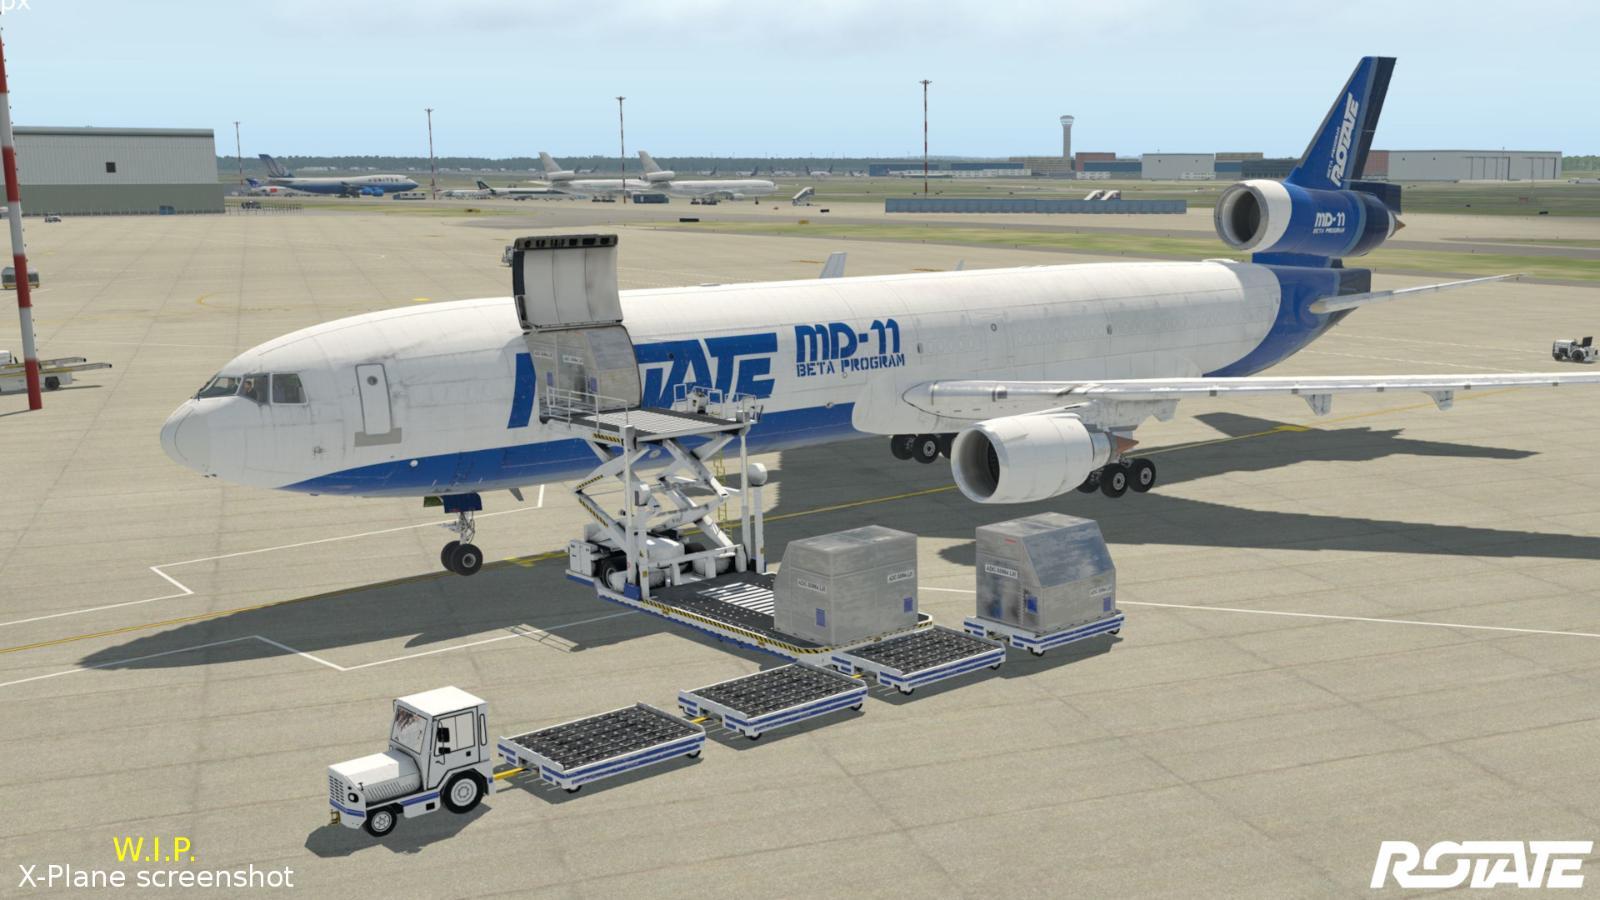 Rotate Confirms MD-11 is in Beta - Rotatesim, X-Plane